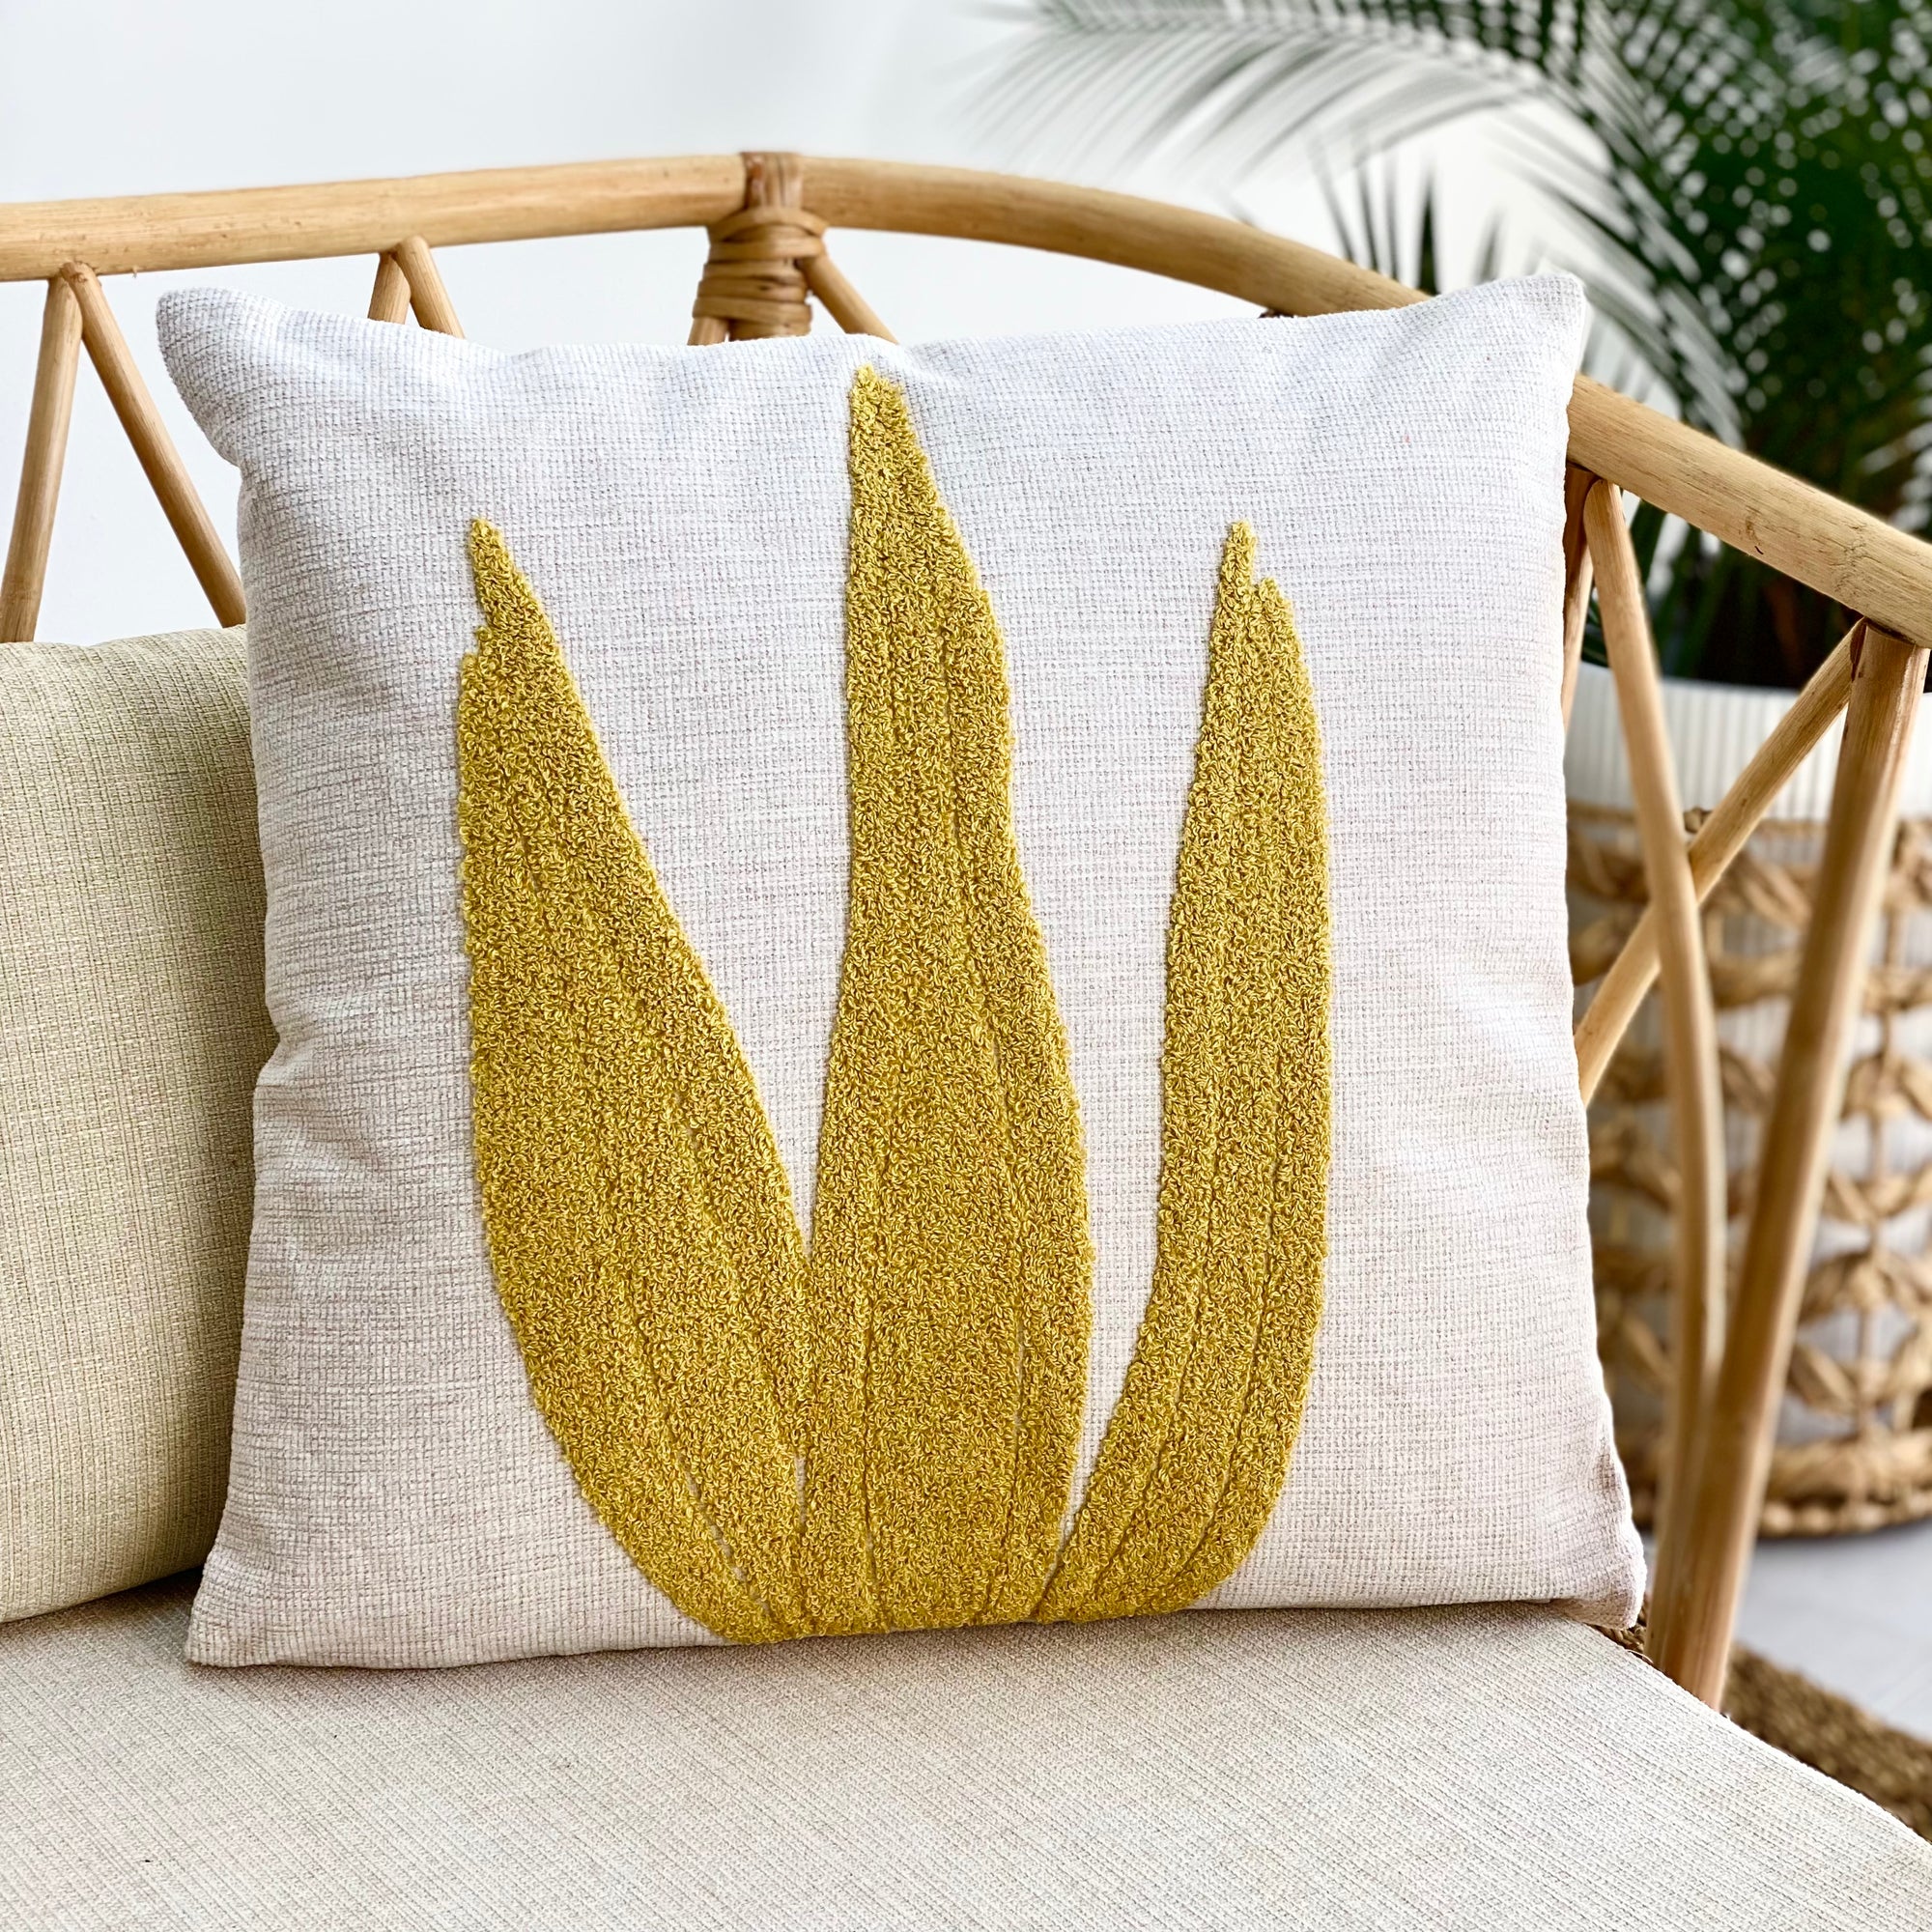 Embroidered Mustard Leaves Pillow